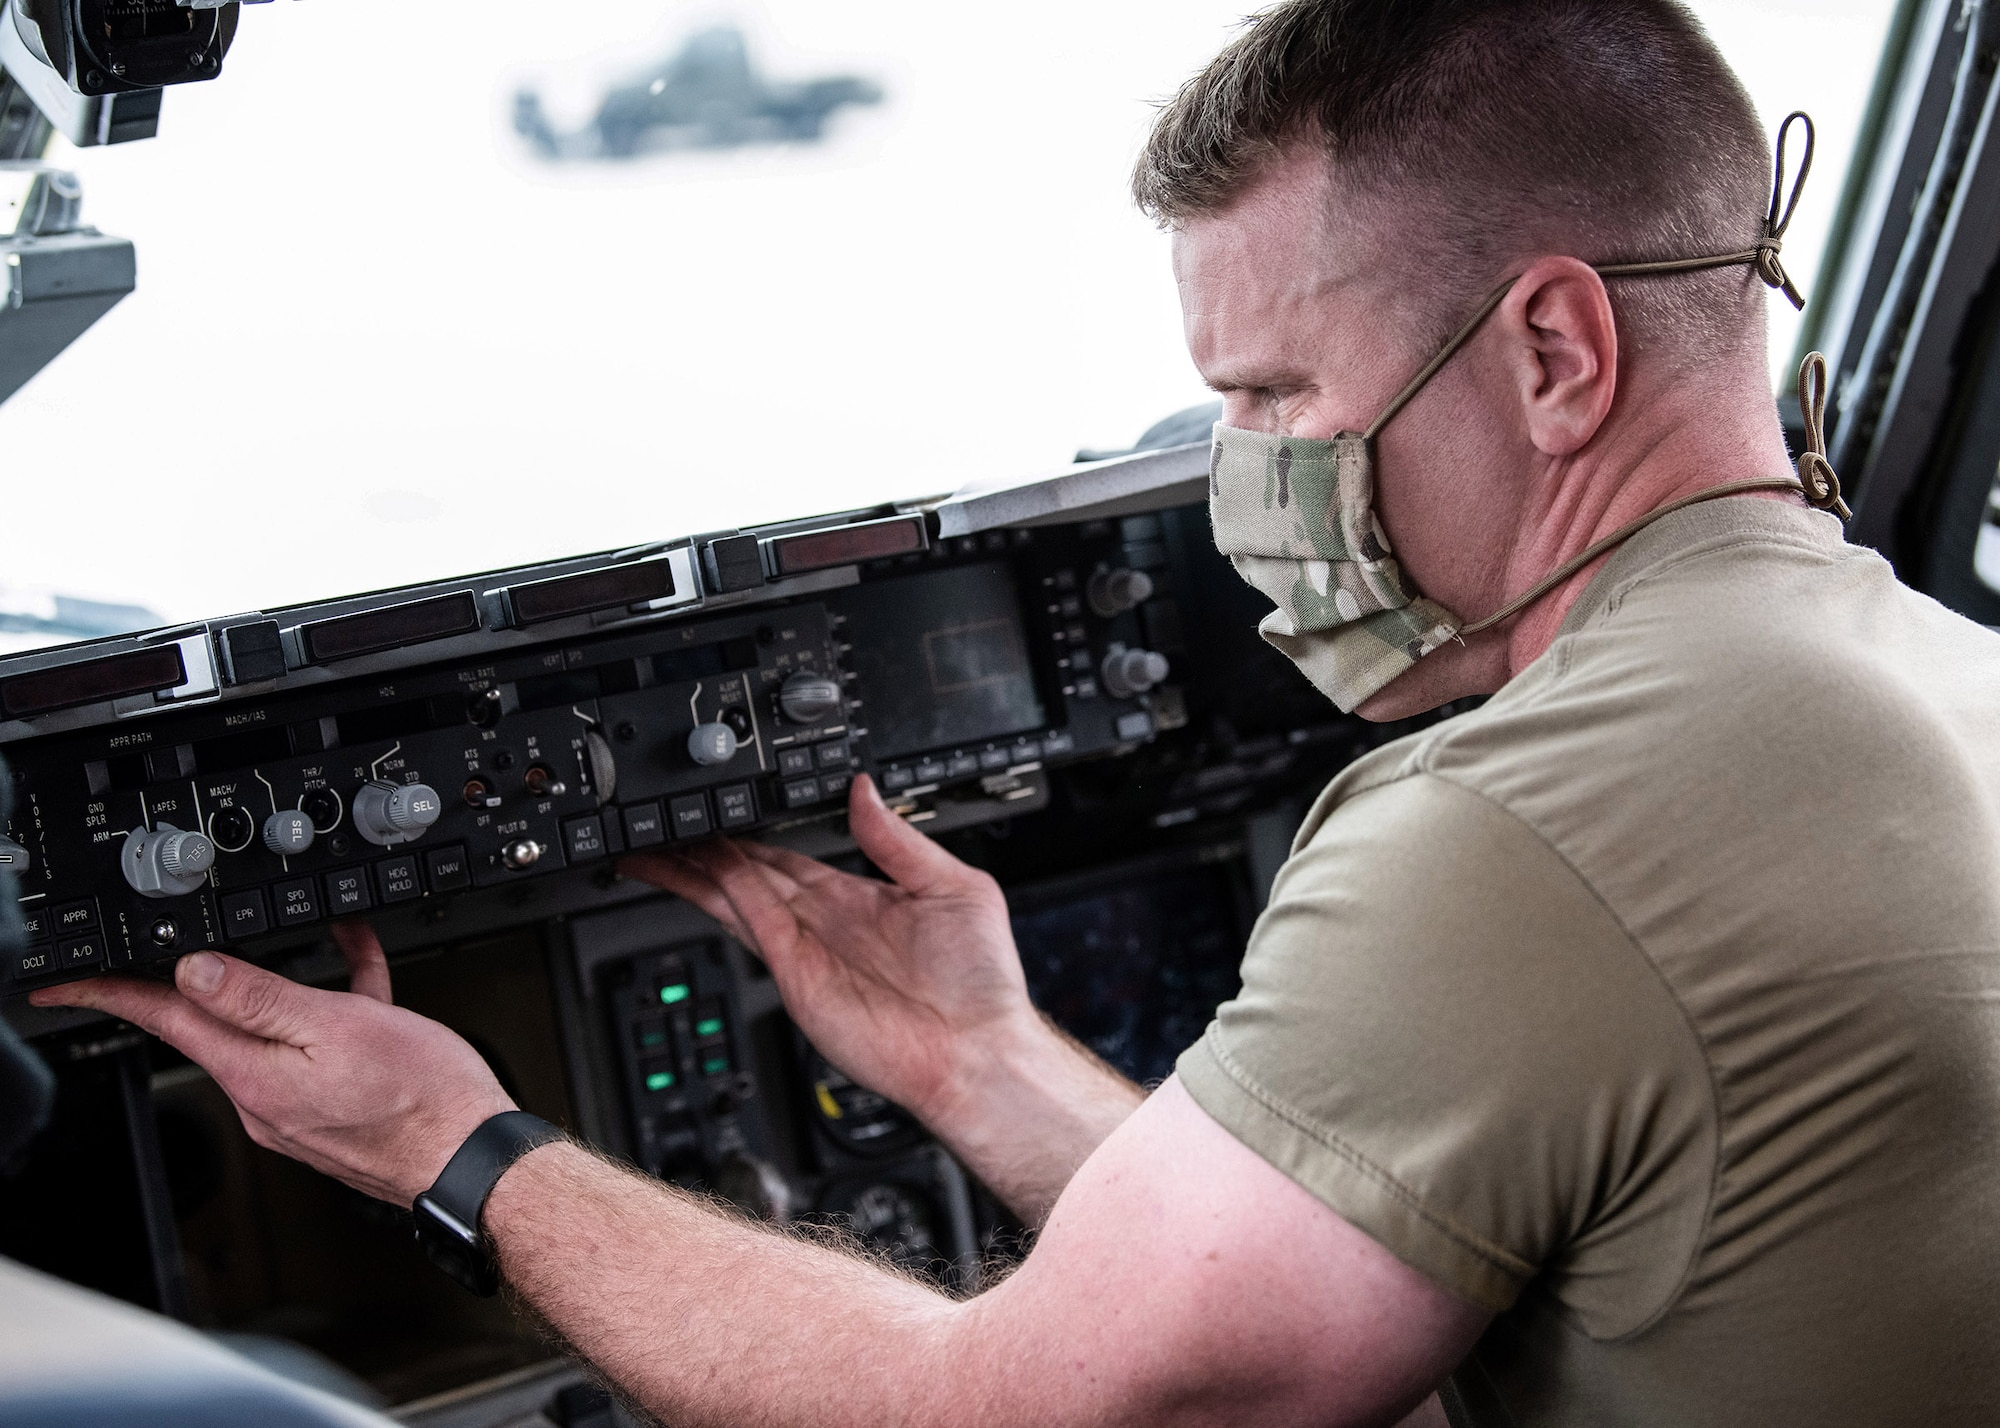 Staff Sgt. Matthew Miklasevich, 445th Aircraft Maintenance Squadron, changes out an auto flight control panel of a C-17 Globemaster III here April 13, 2020. 445th Airlift Wing Reservists continue to fly and maintain its fleet of C-17 aircraft, proving they are ready and staying ready despite the COVID-19 crisis. (U.S. Air Force photo/Mr. Patrick O’Reilly)